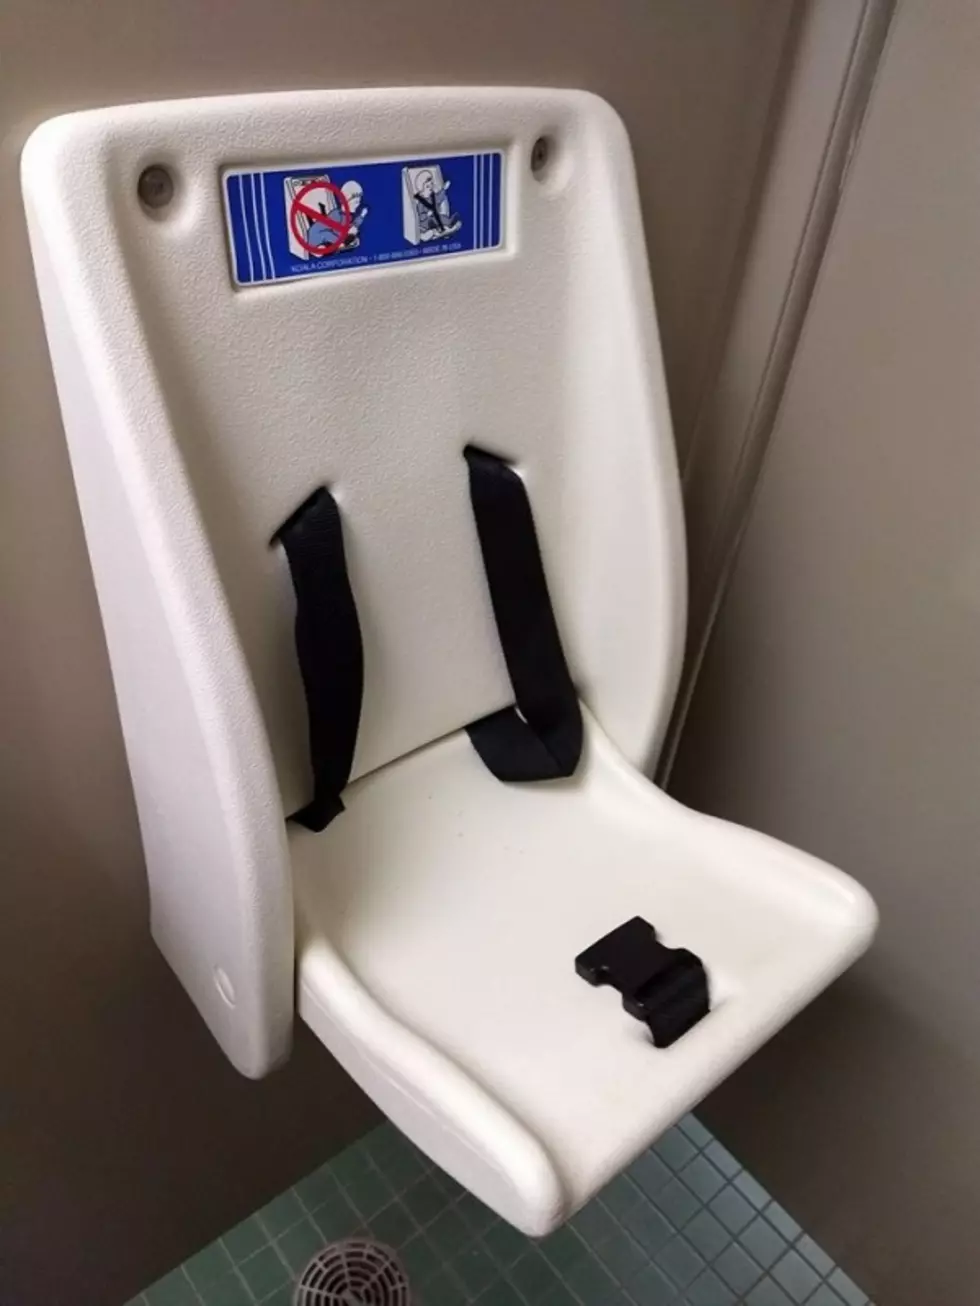 Why Isn&#8217;t This Available For Parents In Every Public Restroom?